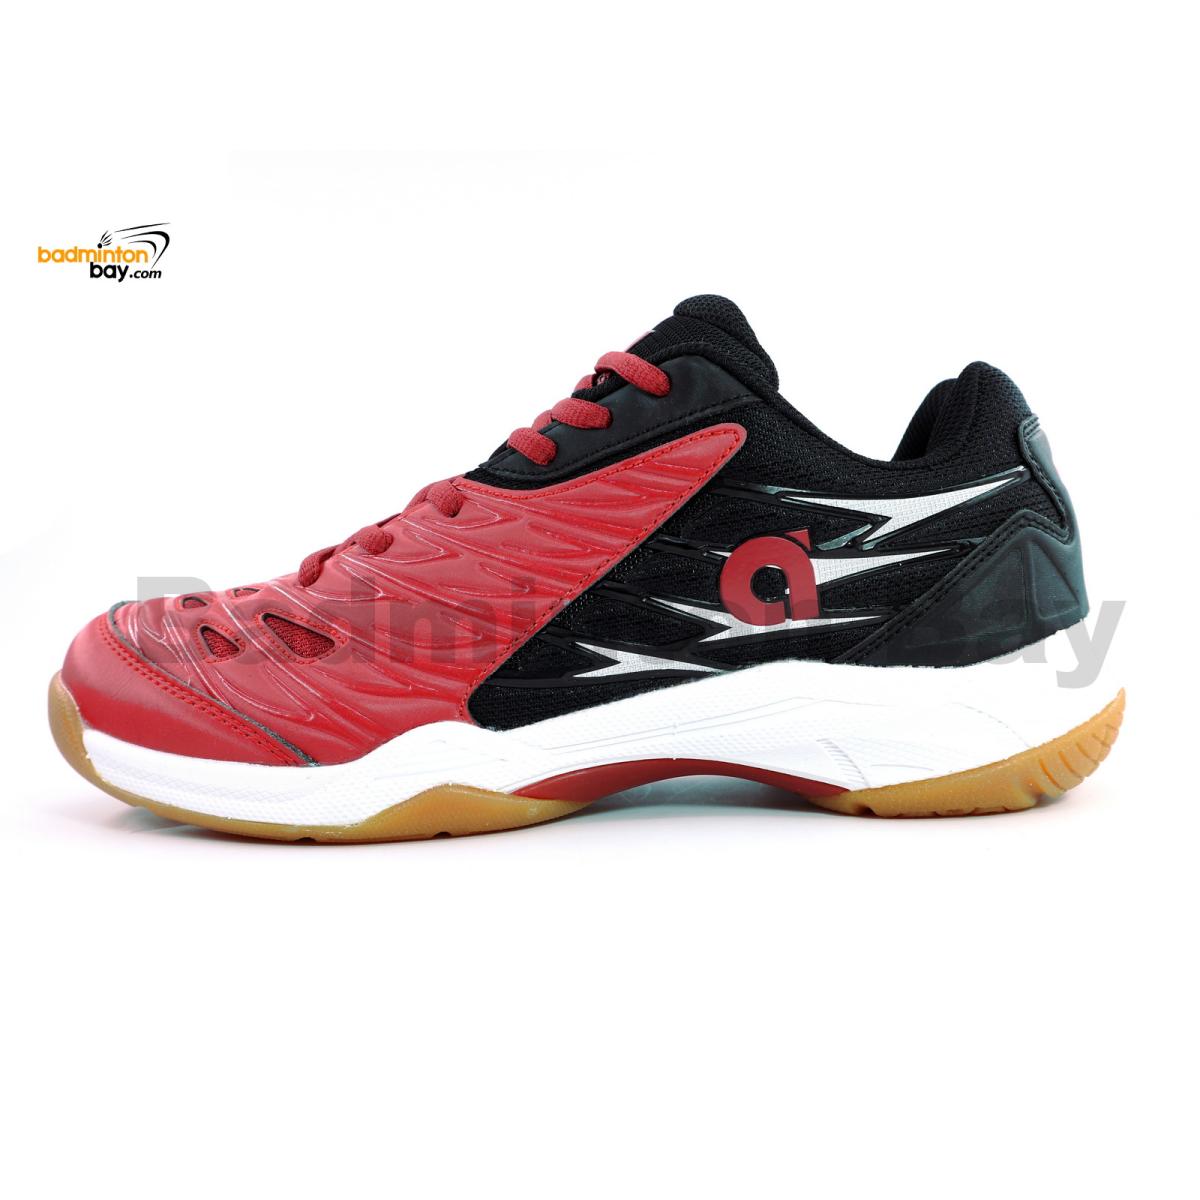 Apacs Cushion Power PRO 728 Red Black Badminton Shoes With Improved ...